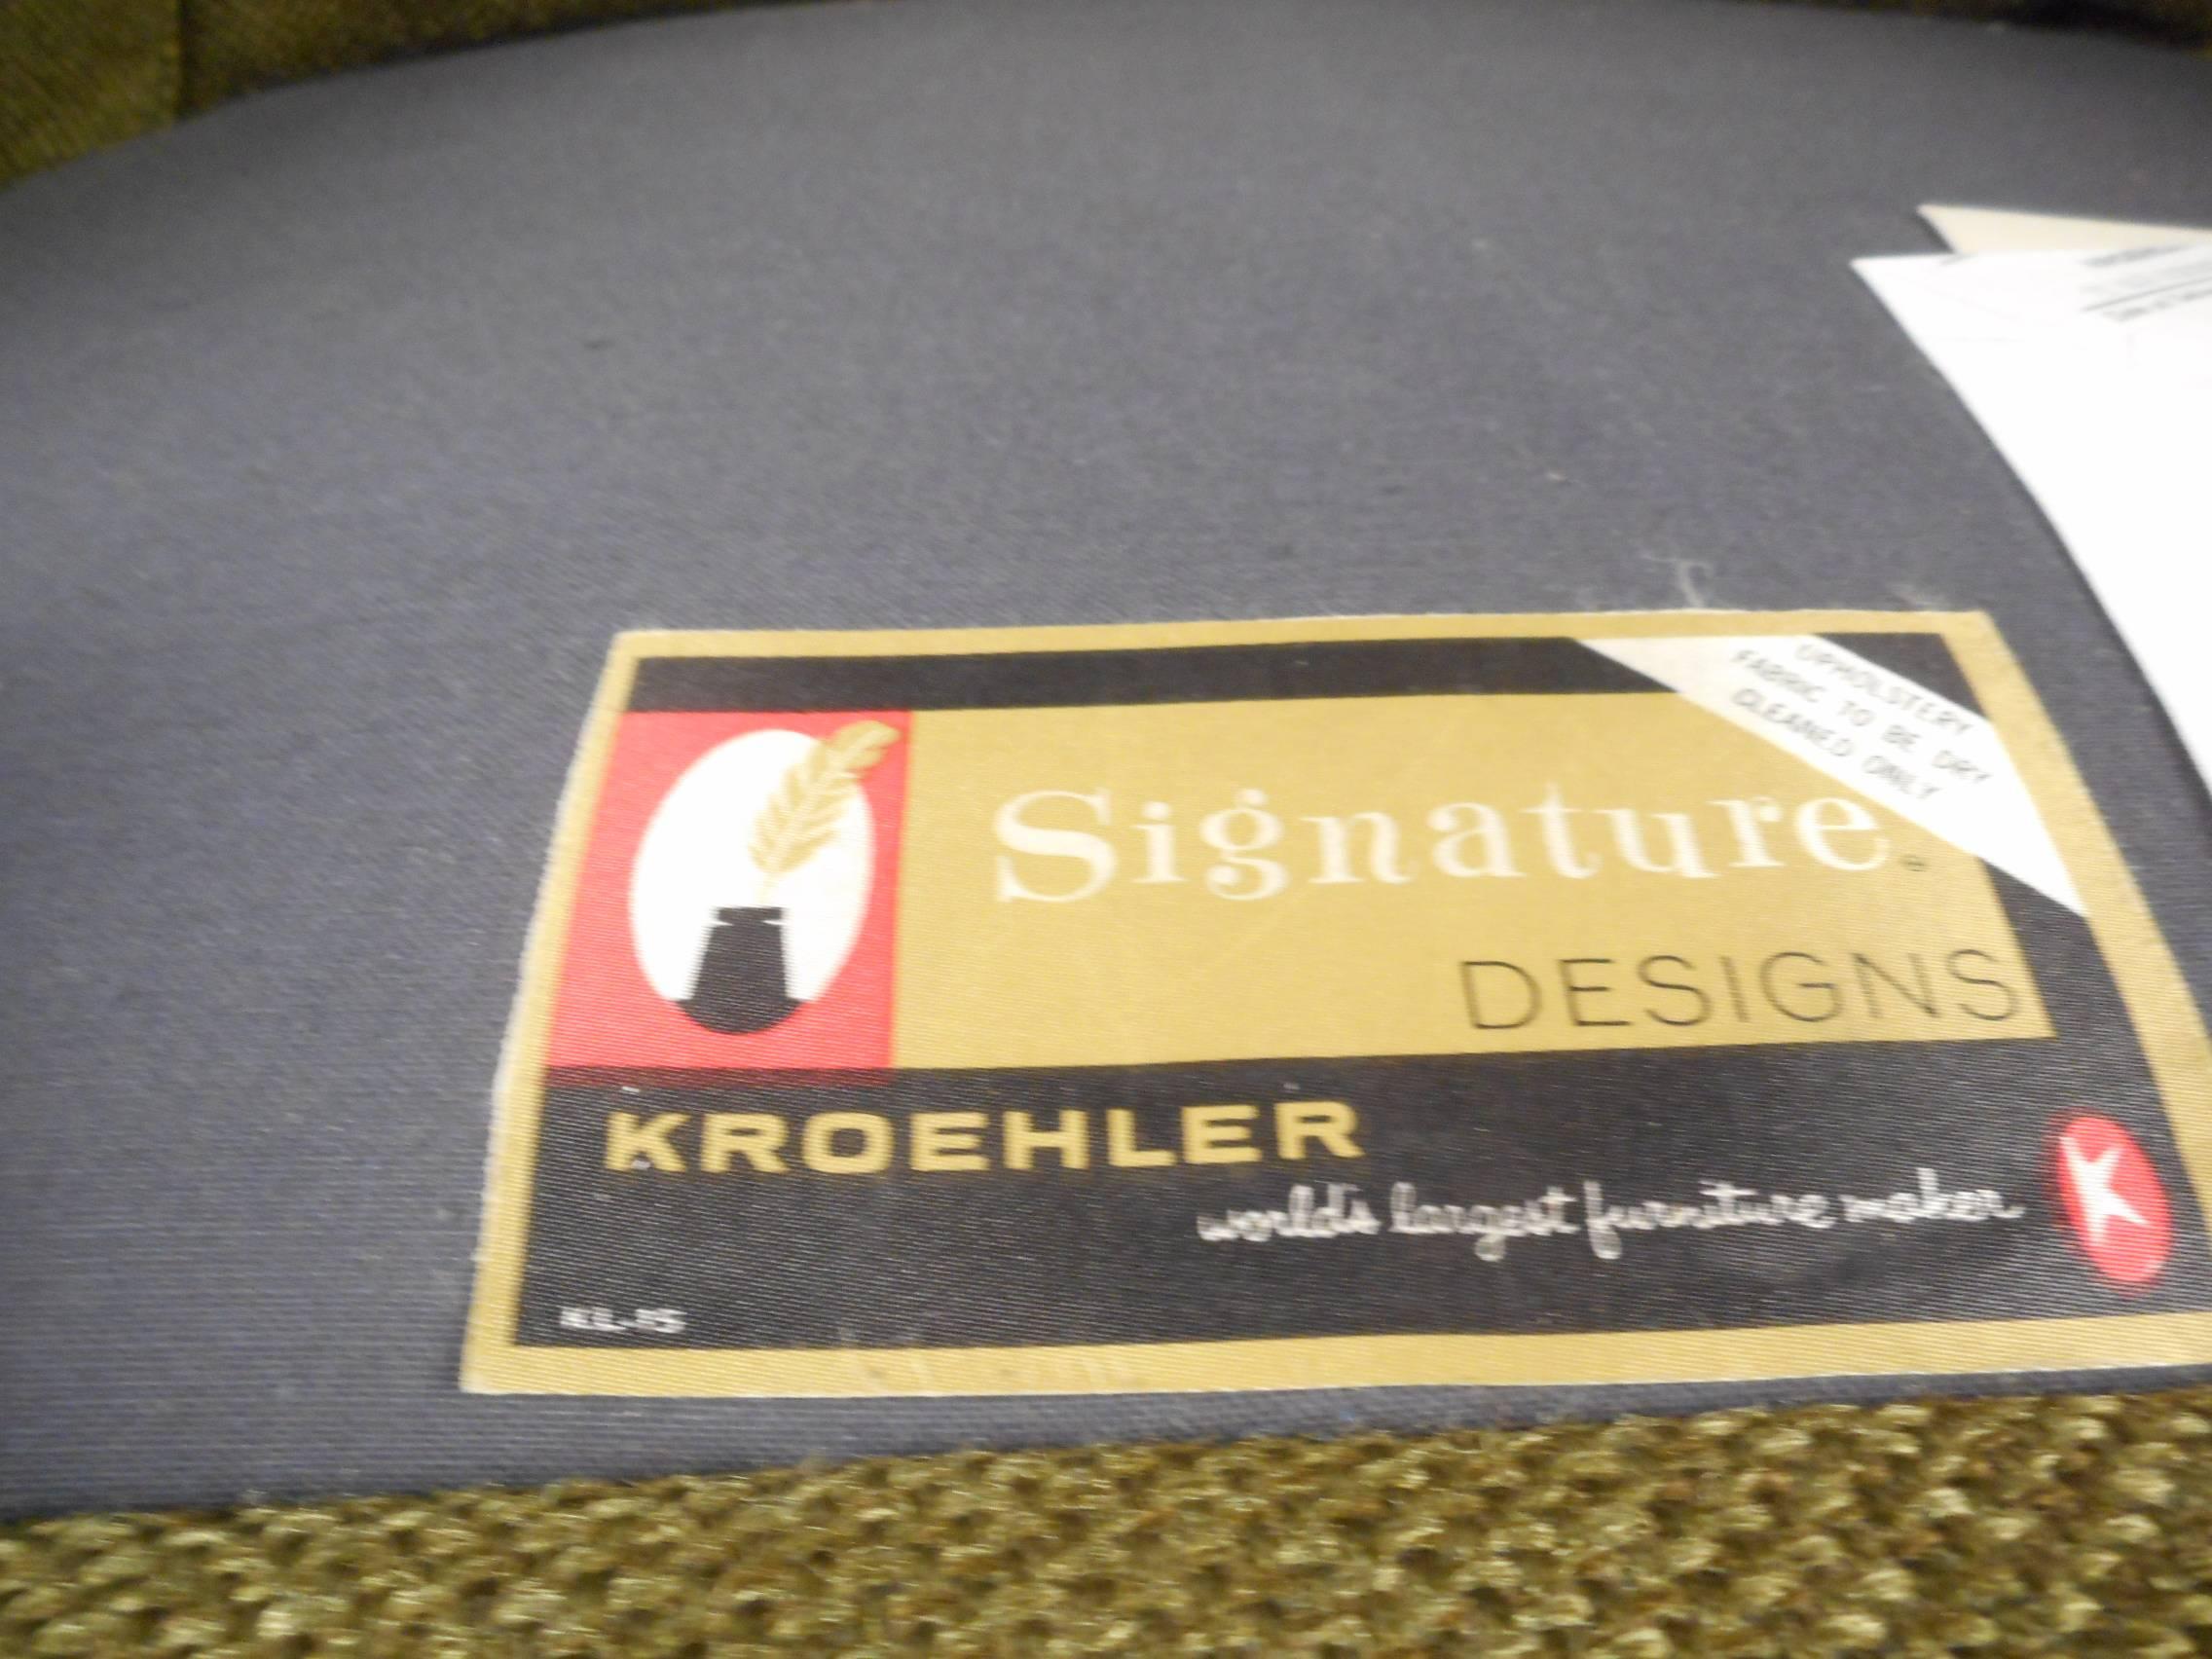 Late 20th Century Mid-Century Modern Tufted Lounge Chair by Kroehler Mfg Co